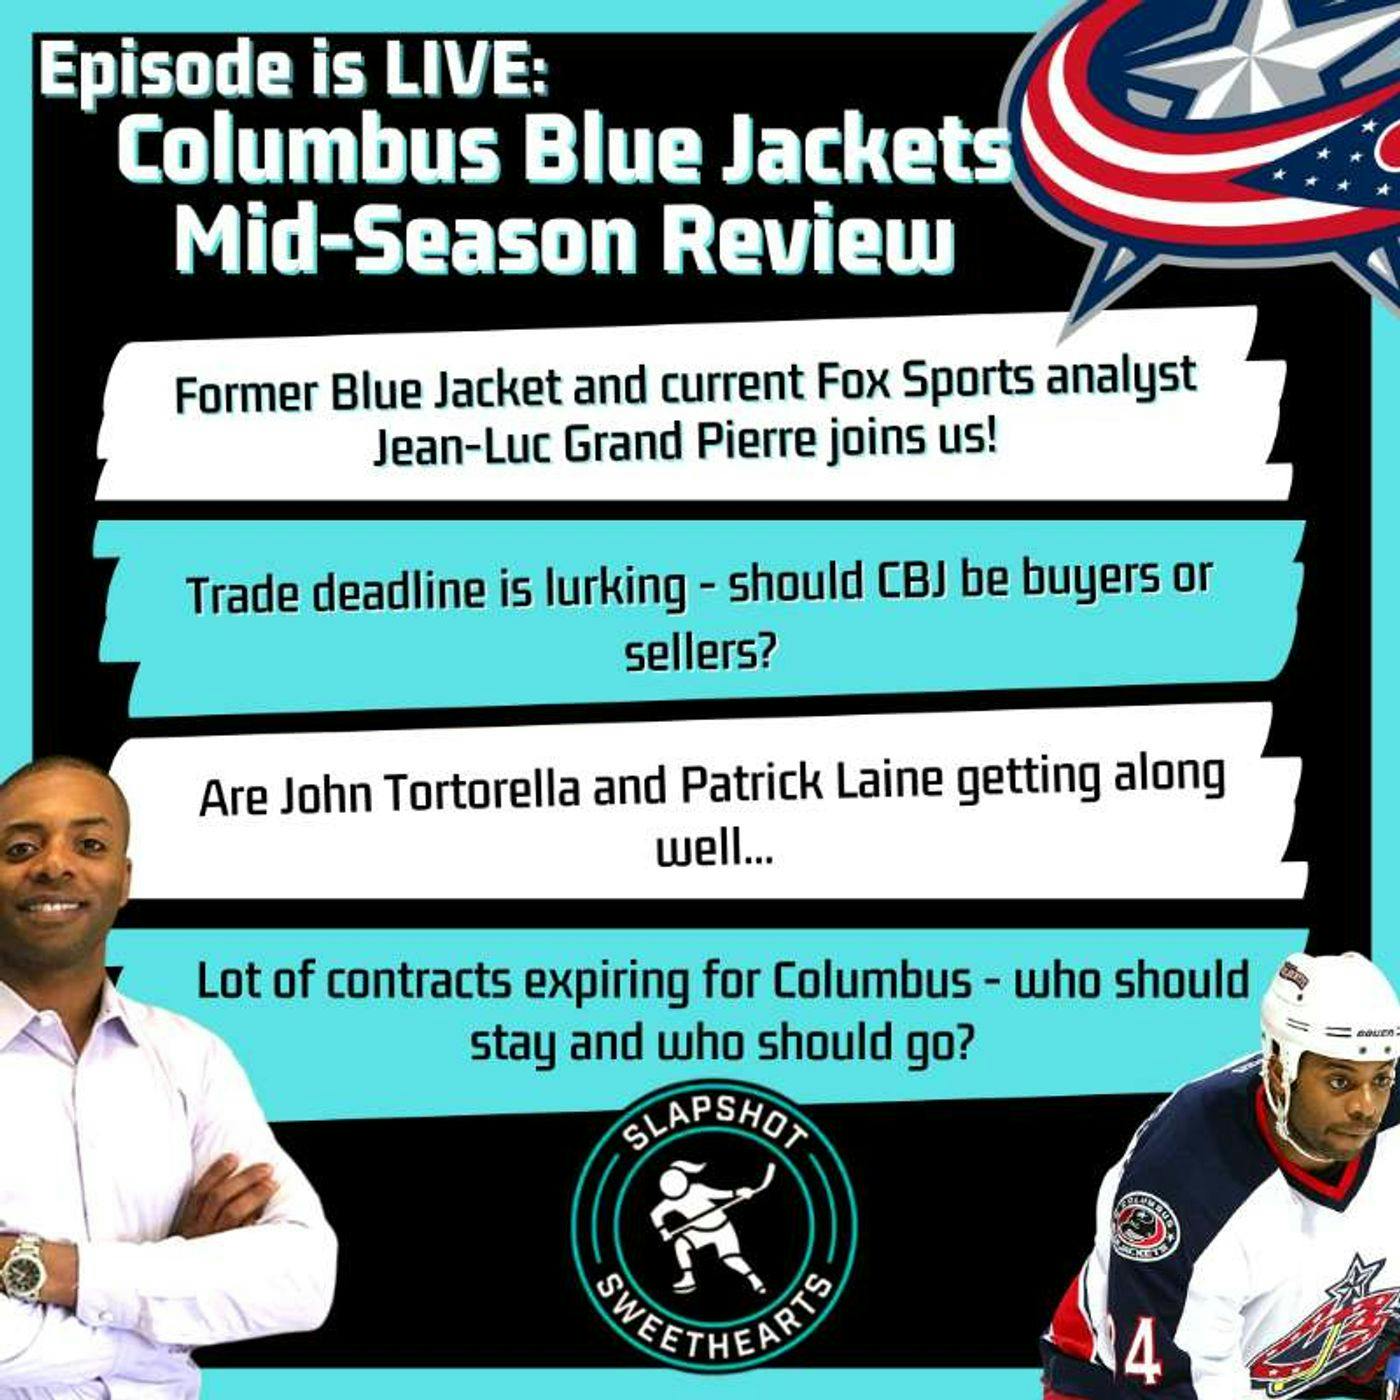 Columbus Blue Jackets Mid-Season Review with Jean-Luc Grand-Pierre